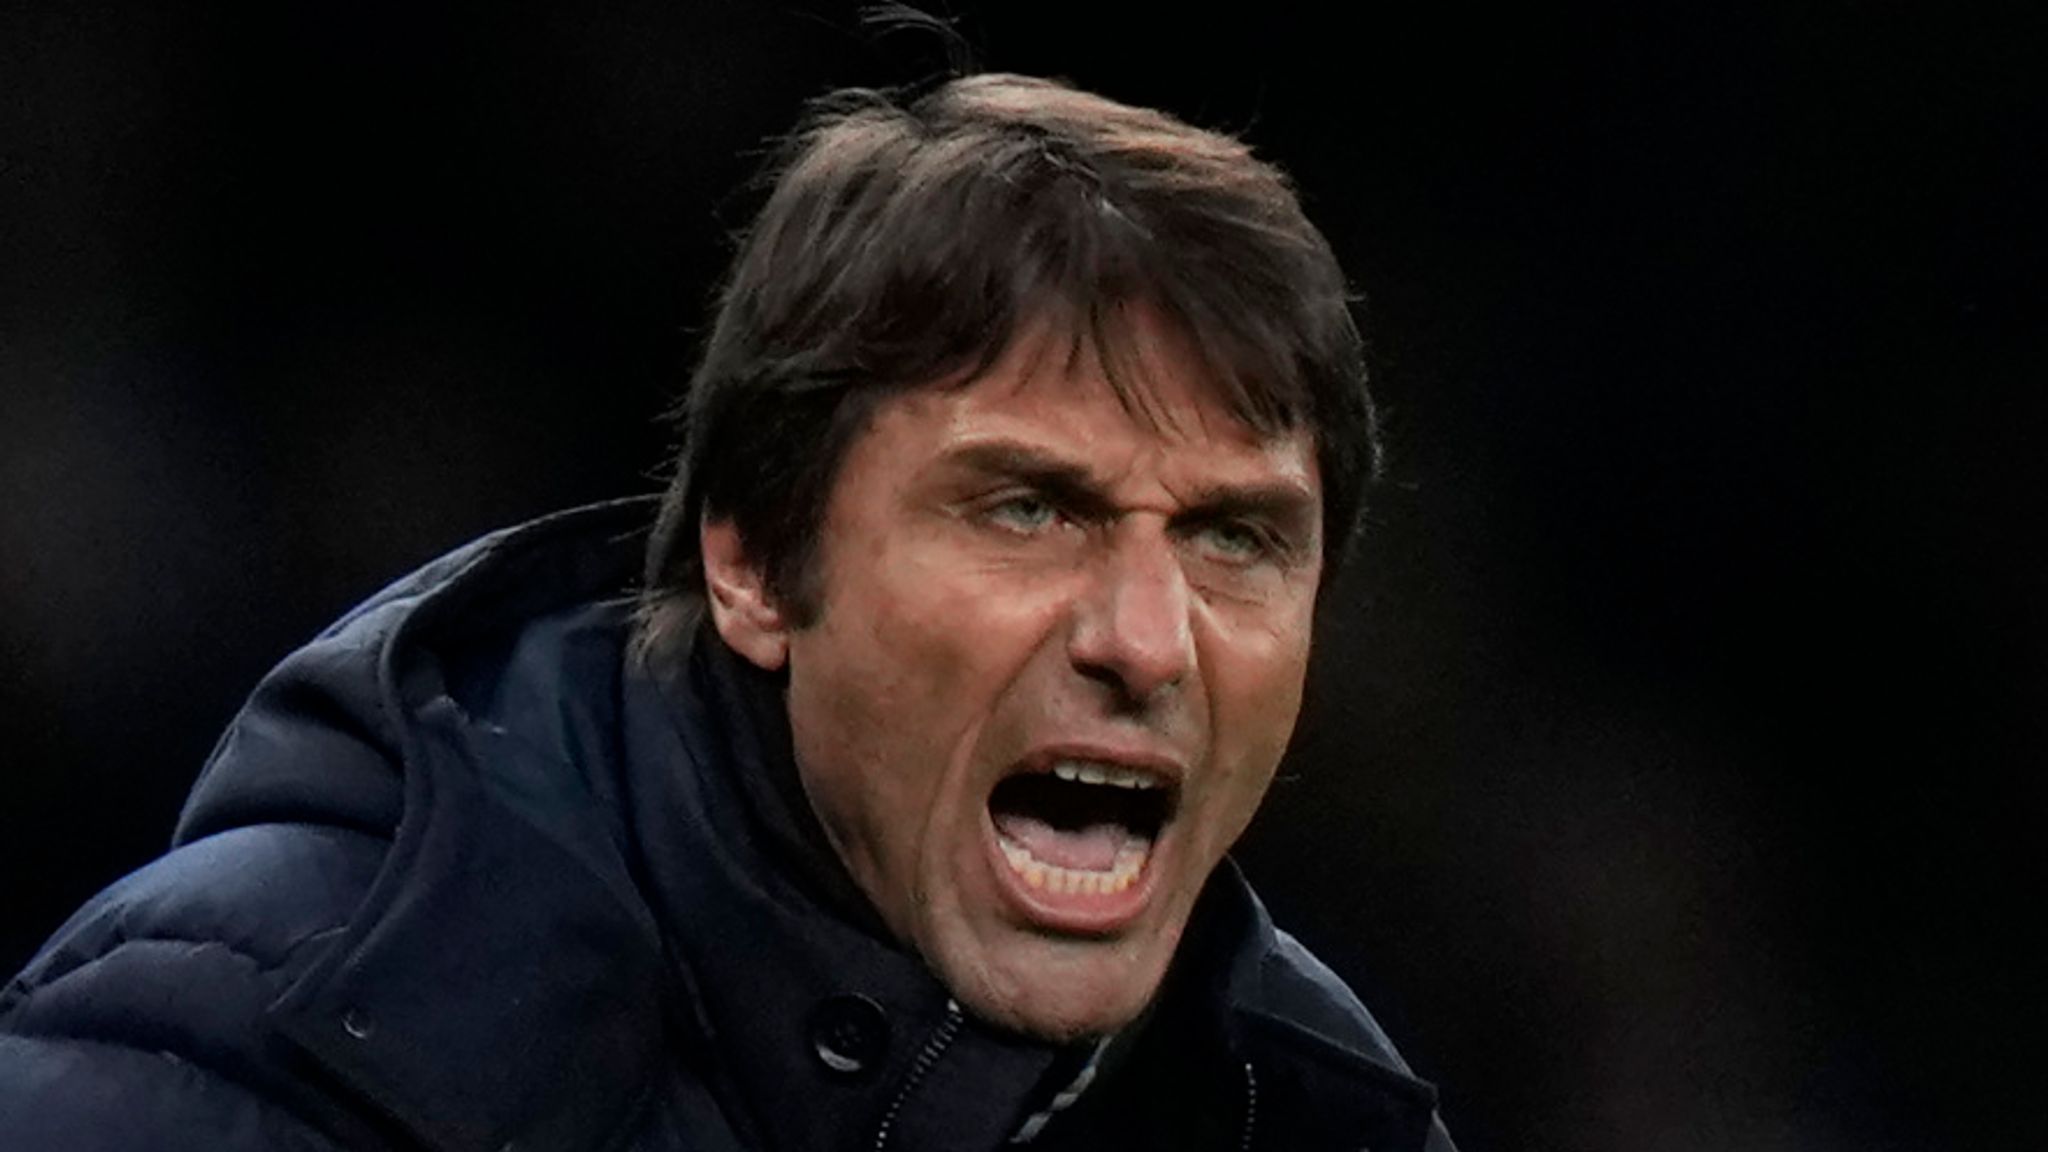 Tottenham&#39;s head coach Antonio Conte gives instructions to his players during the English Premier League soccer match between Tottenham Hotspur and Southampton at the Tottenham Hotspur Stadium in London, Wednesday, Feb. 9, 2022.